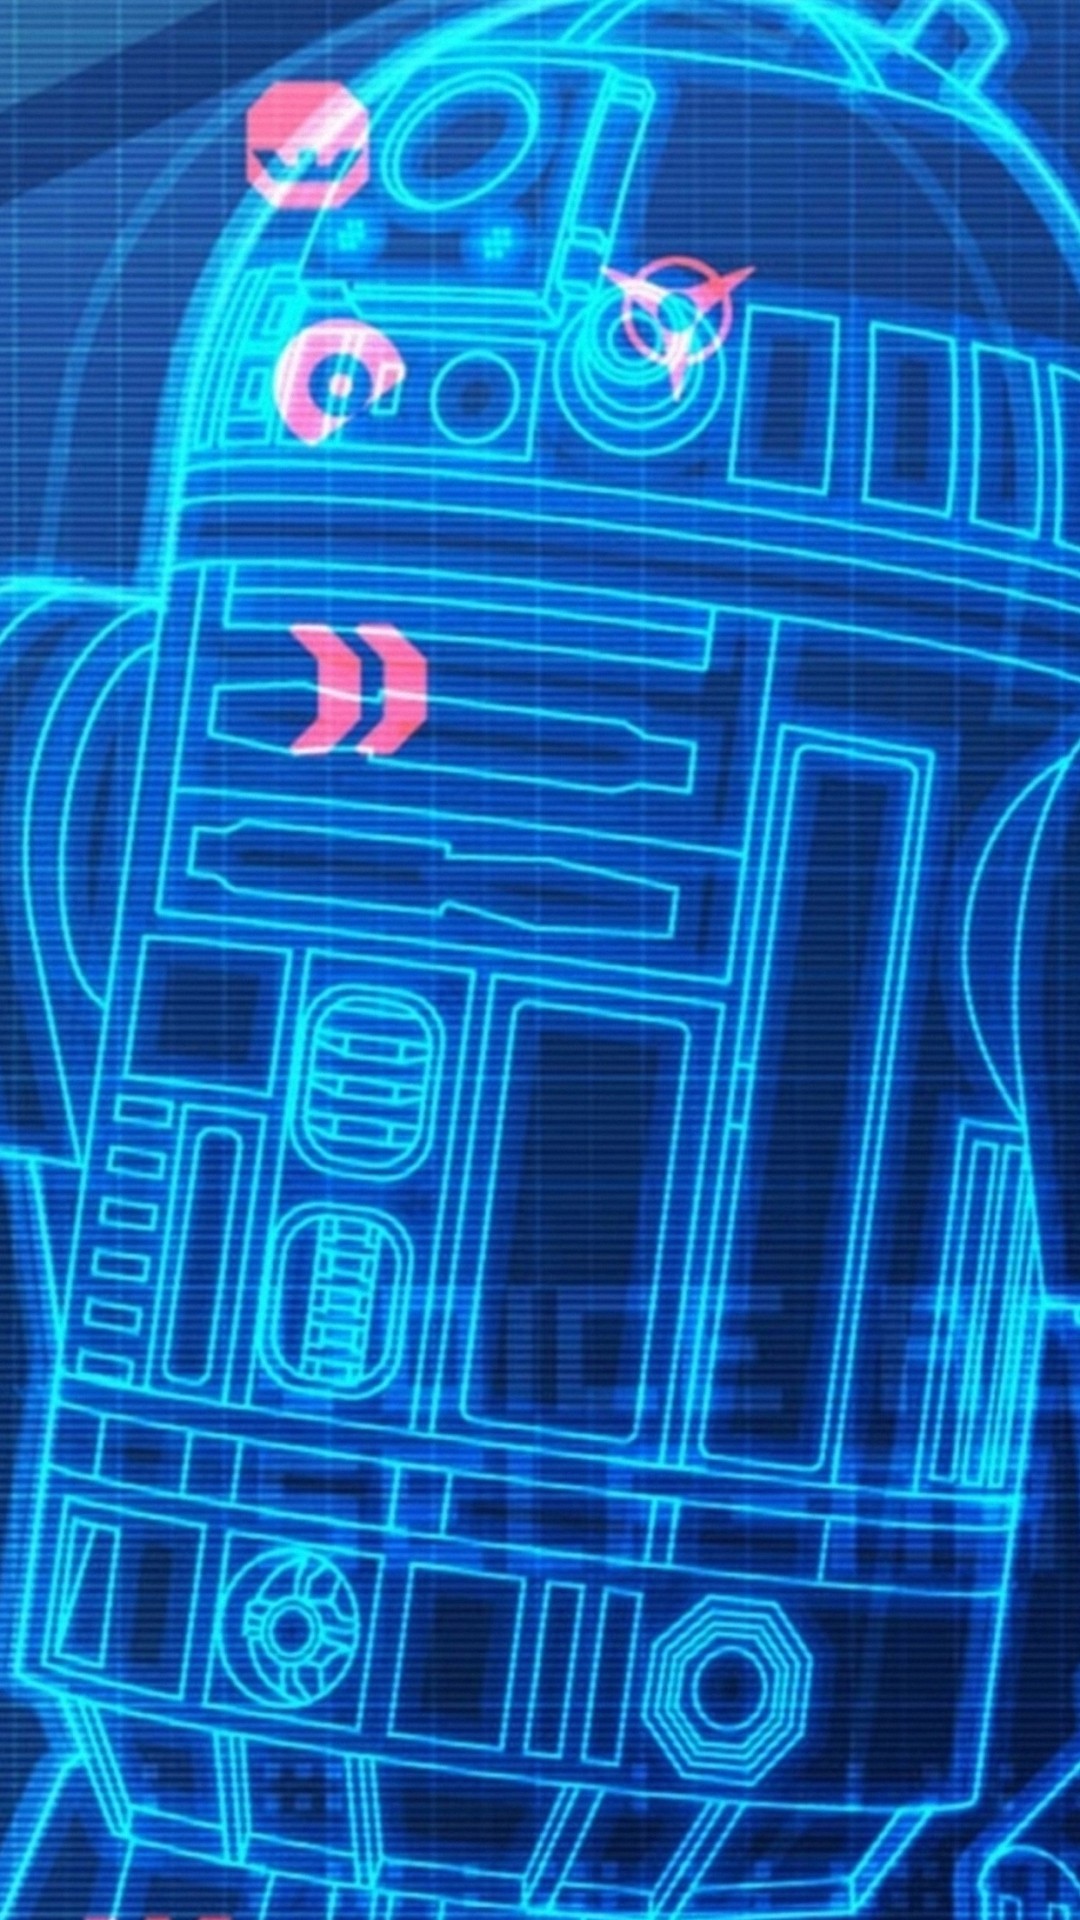 R2d2 スターウォーズ Iphone Wallpapers